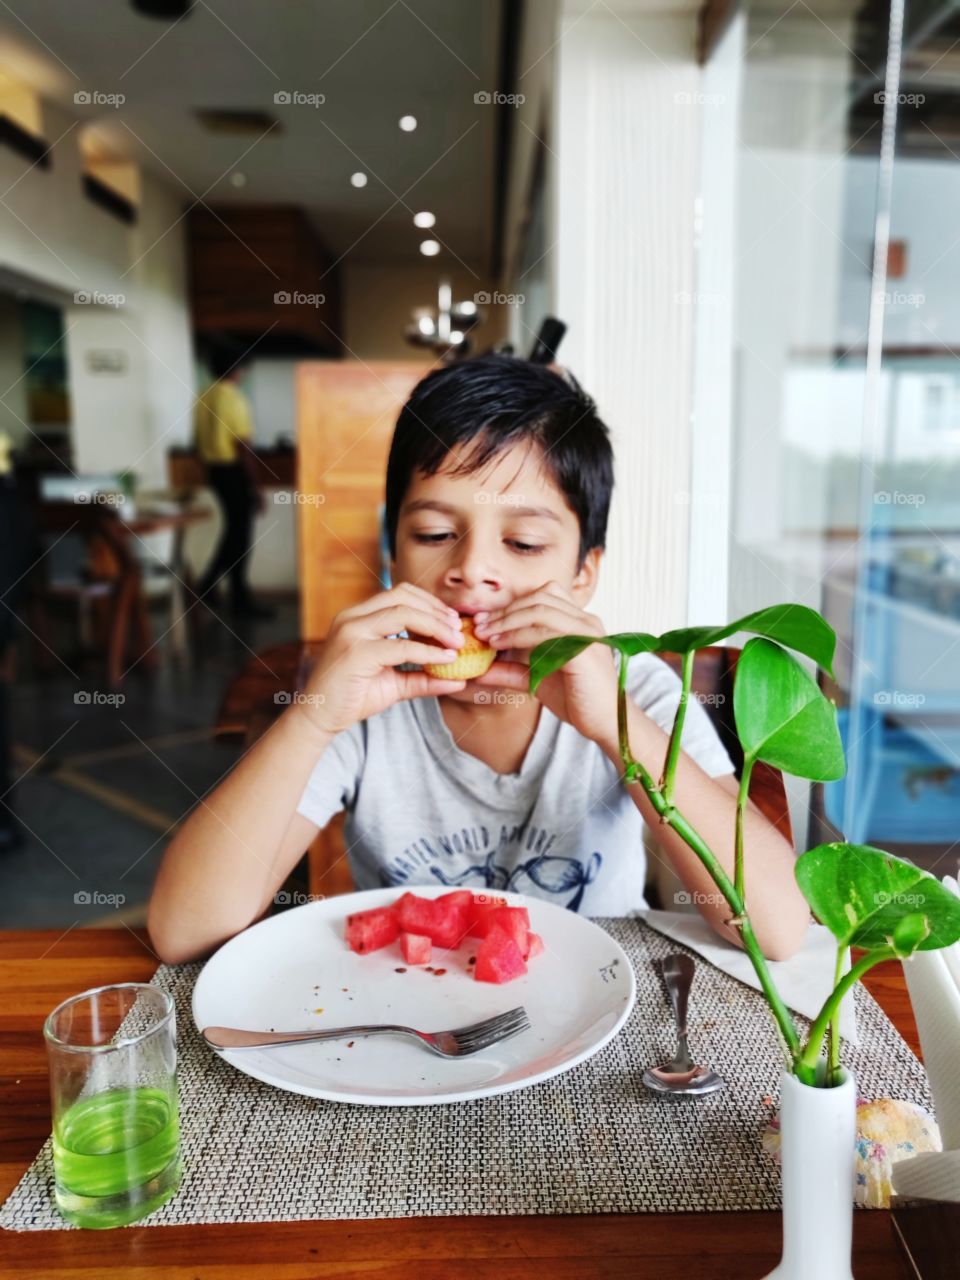 small boy eating breakfast at a hotel or resort restaurant in the morning